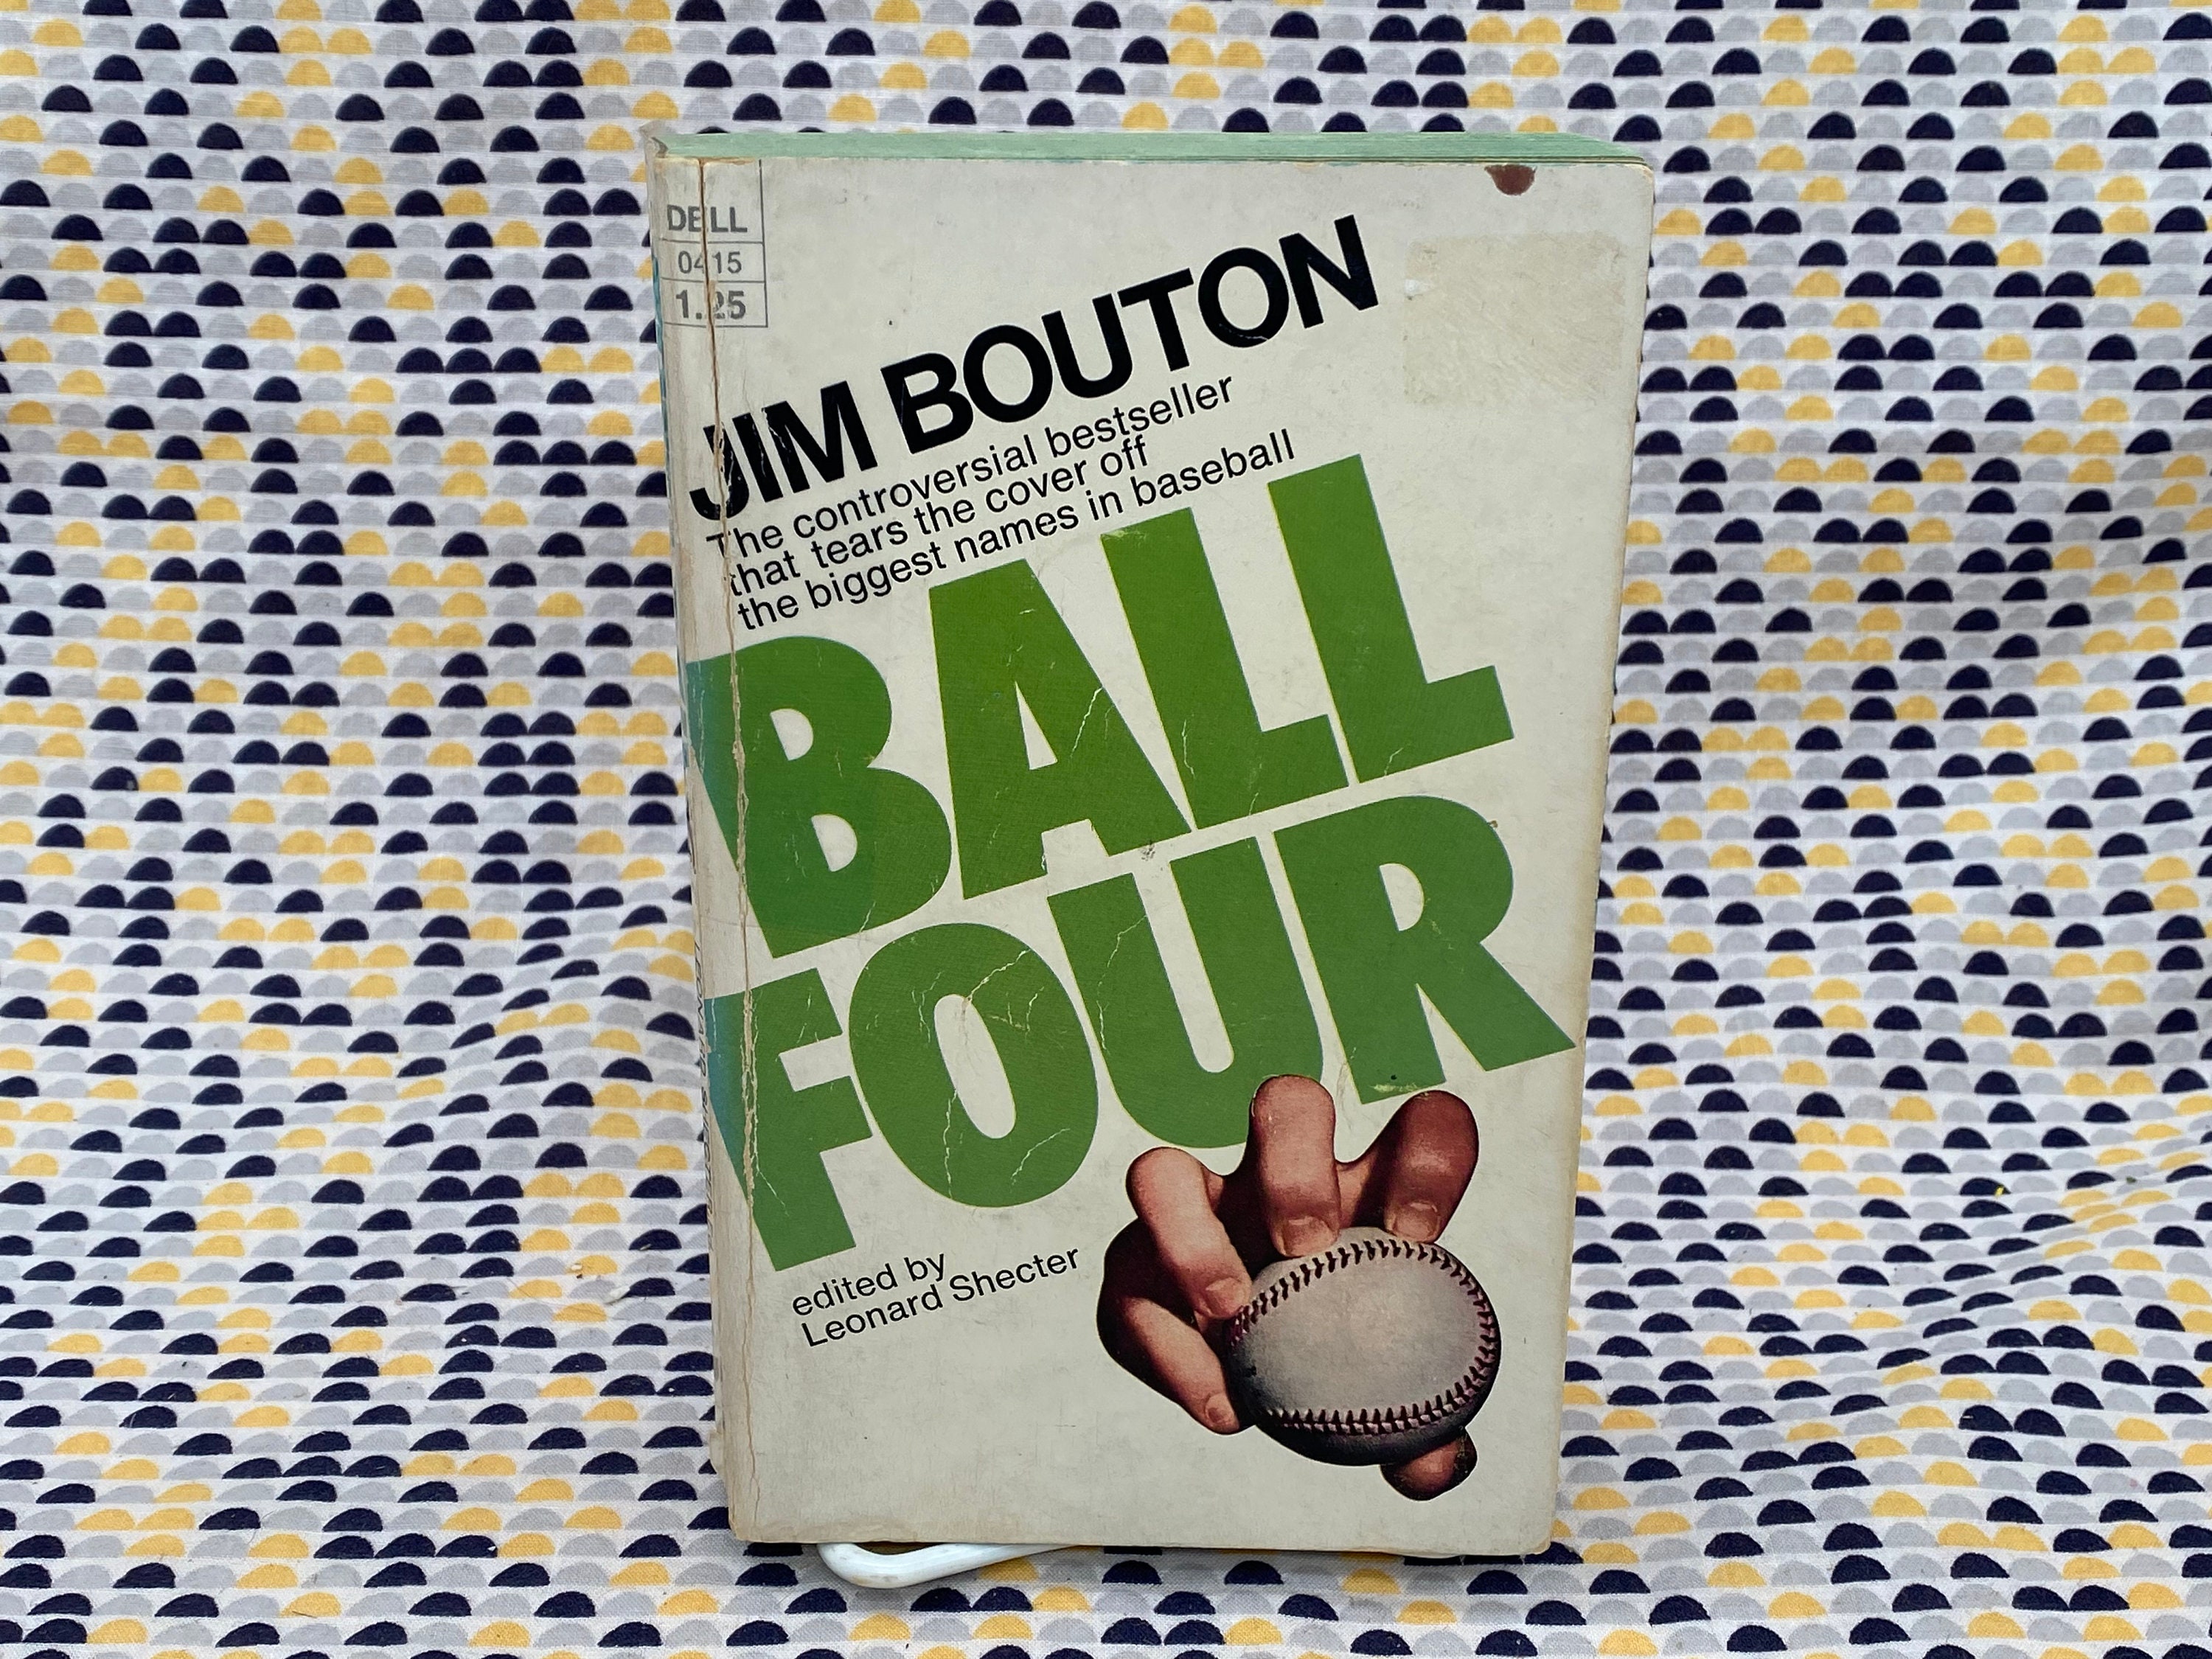 Jim Bouton Ball Four Vintage Paperback Book Dell Edition -  Israel